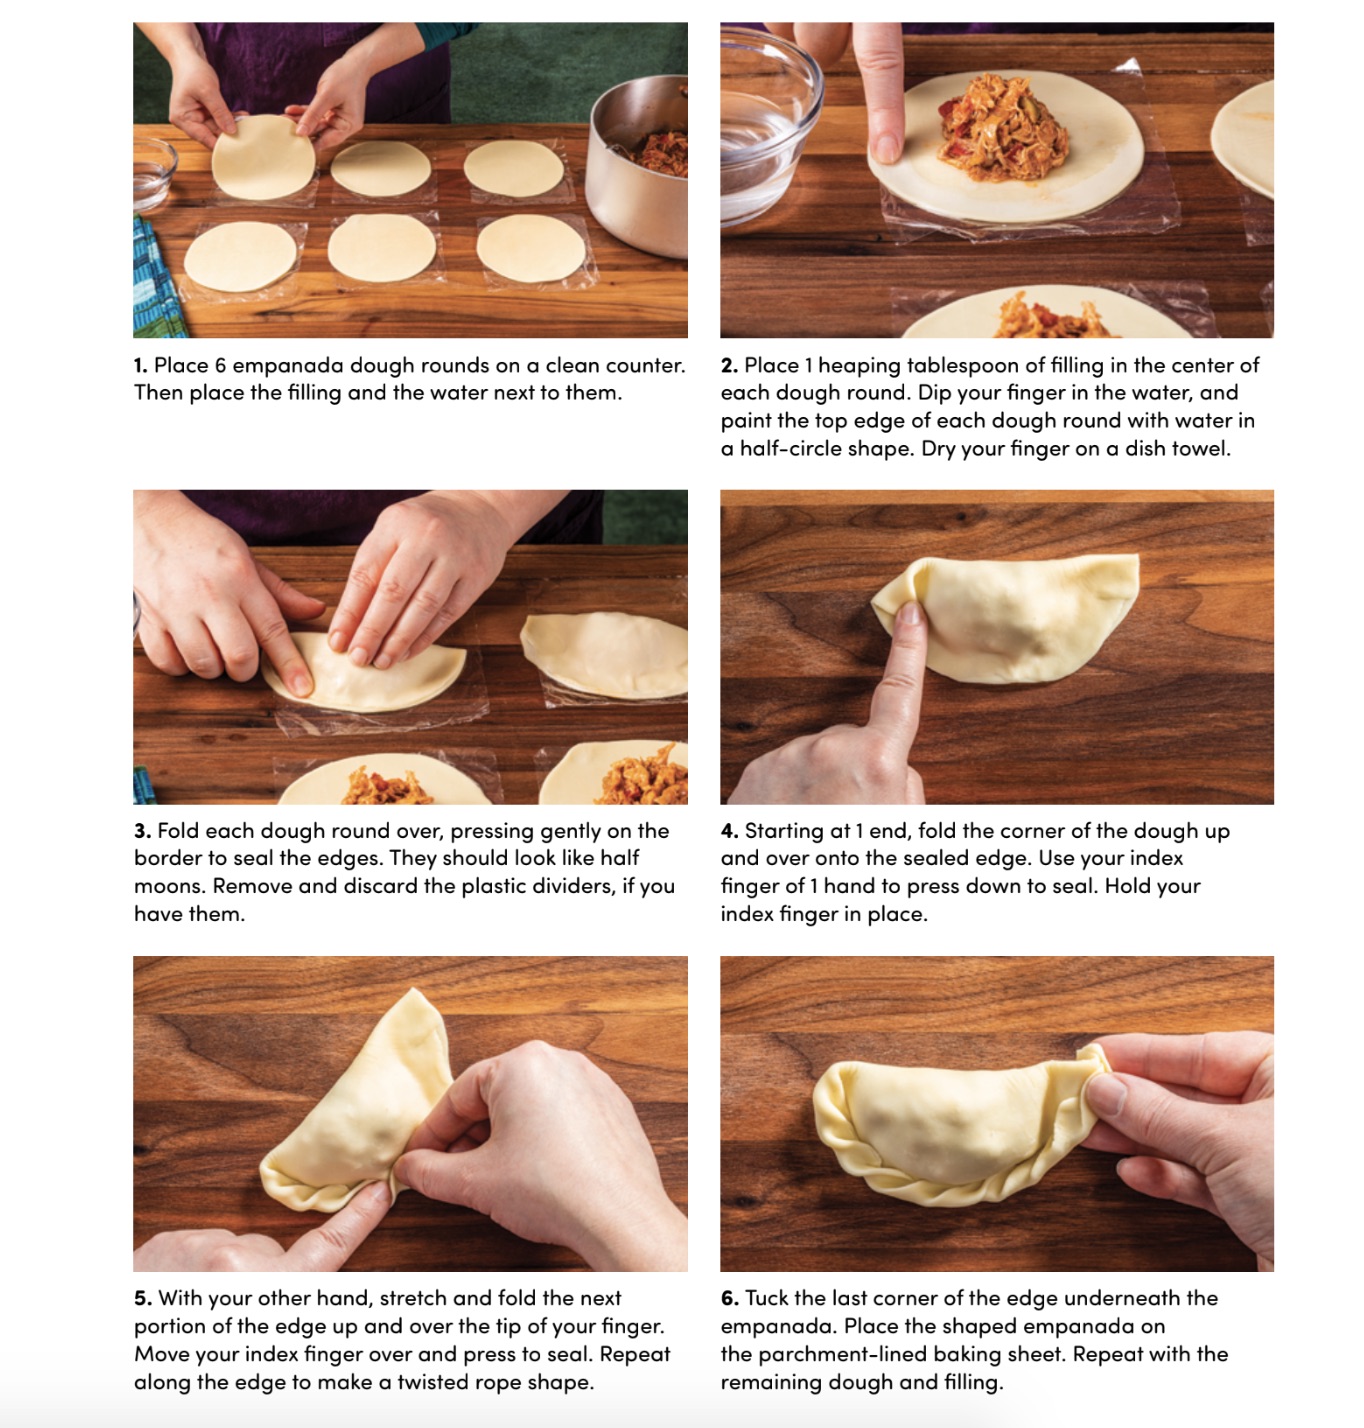 PHOTO: How to properly fold an empanada from Gaby Melian's technique in her new cookbook.